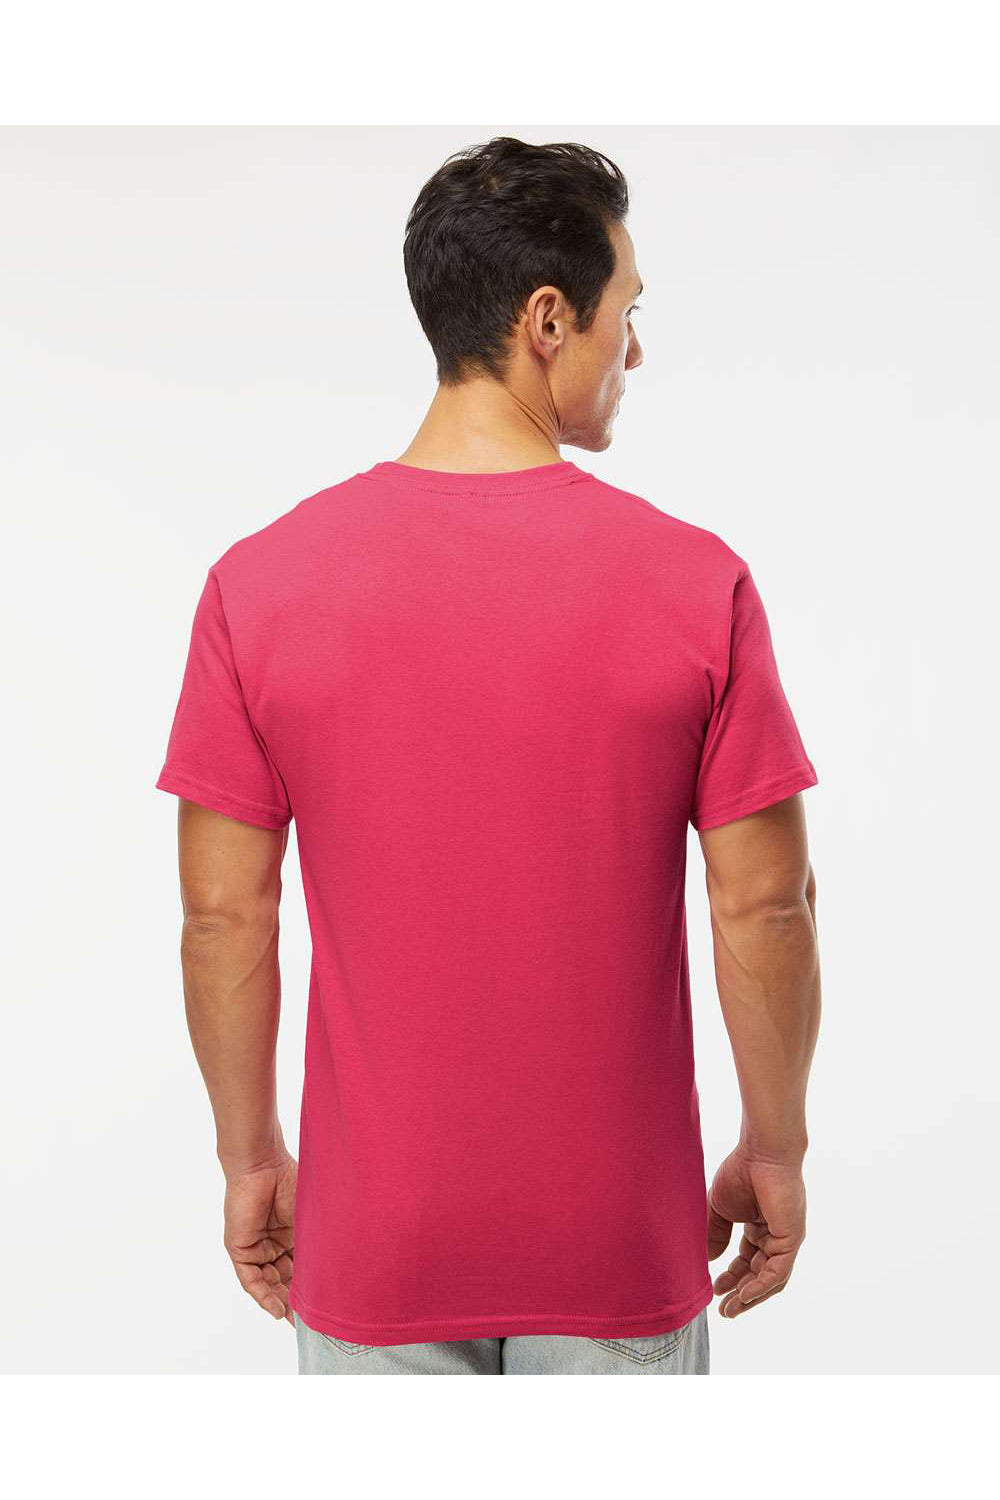 M&O 4800 Mens Gold Soft Touch Short Sleeve Crewneck T-Shirt Heliconia Pink Model Back